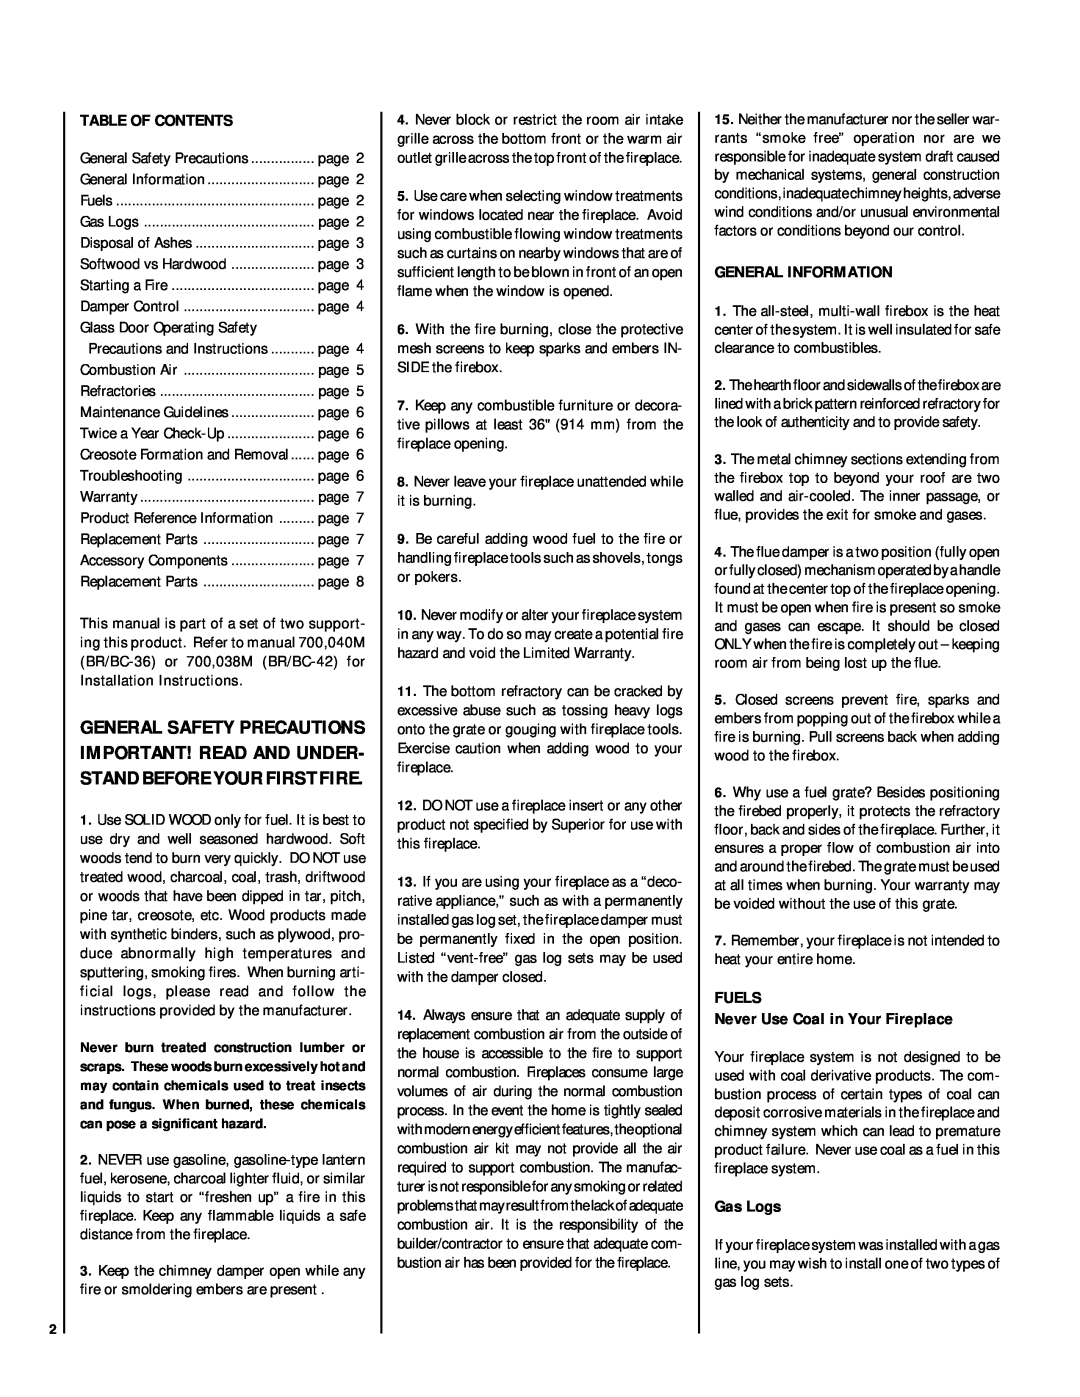 Lennox Hearth BRI-36/42-2 manual Table Of Contents, General Information, FUELS Never Use Coal in Your Fireplace, Gas Logs 